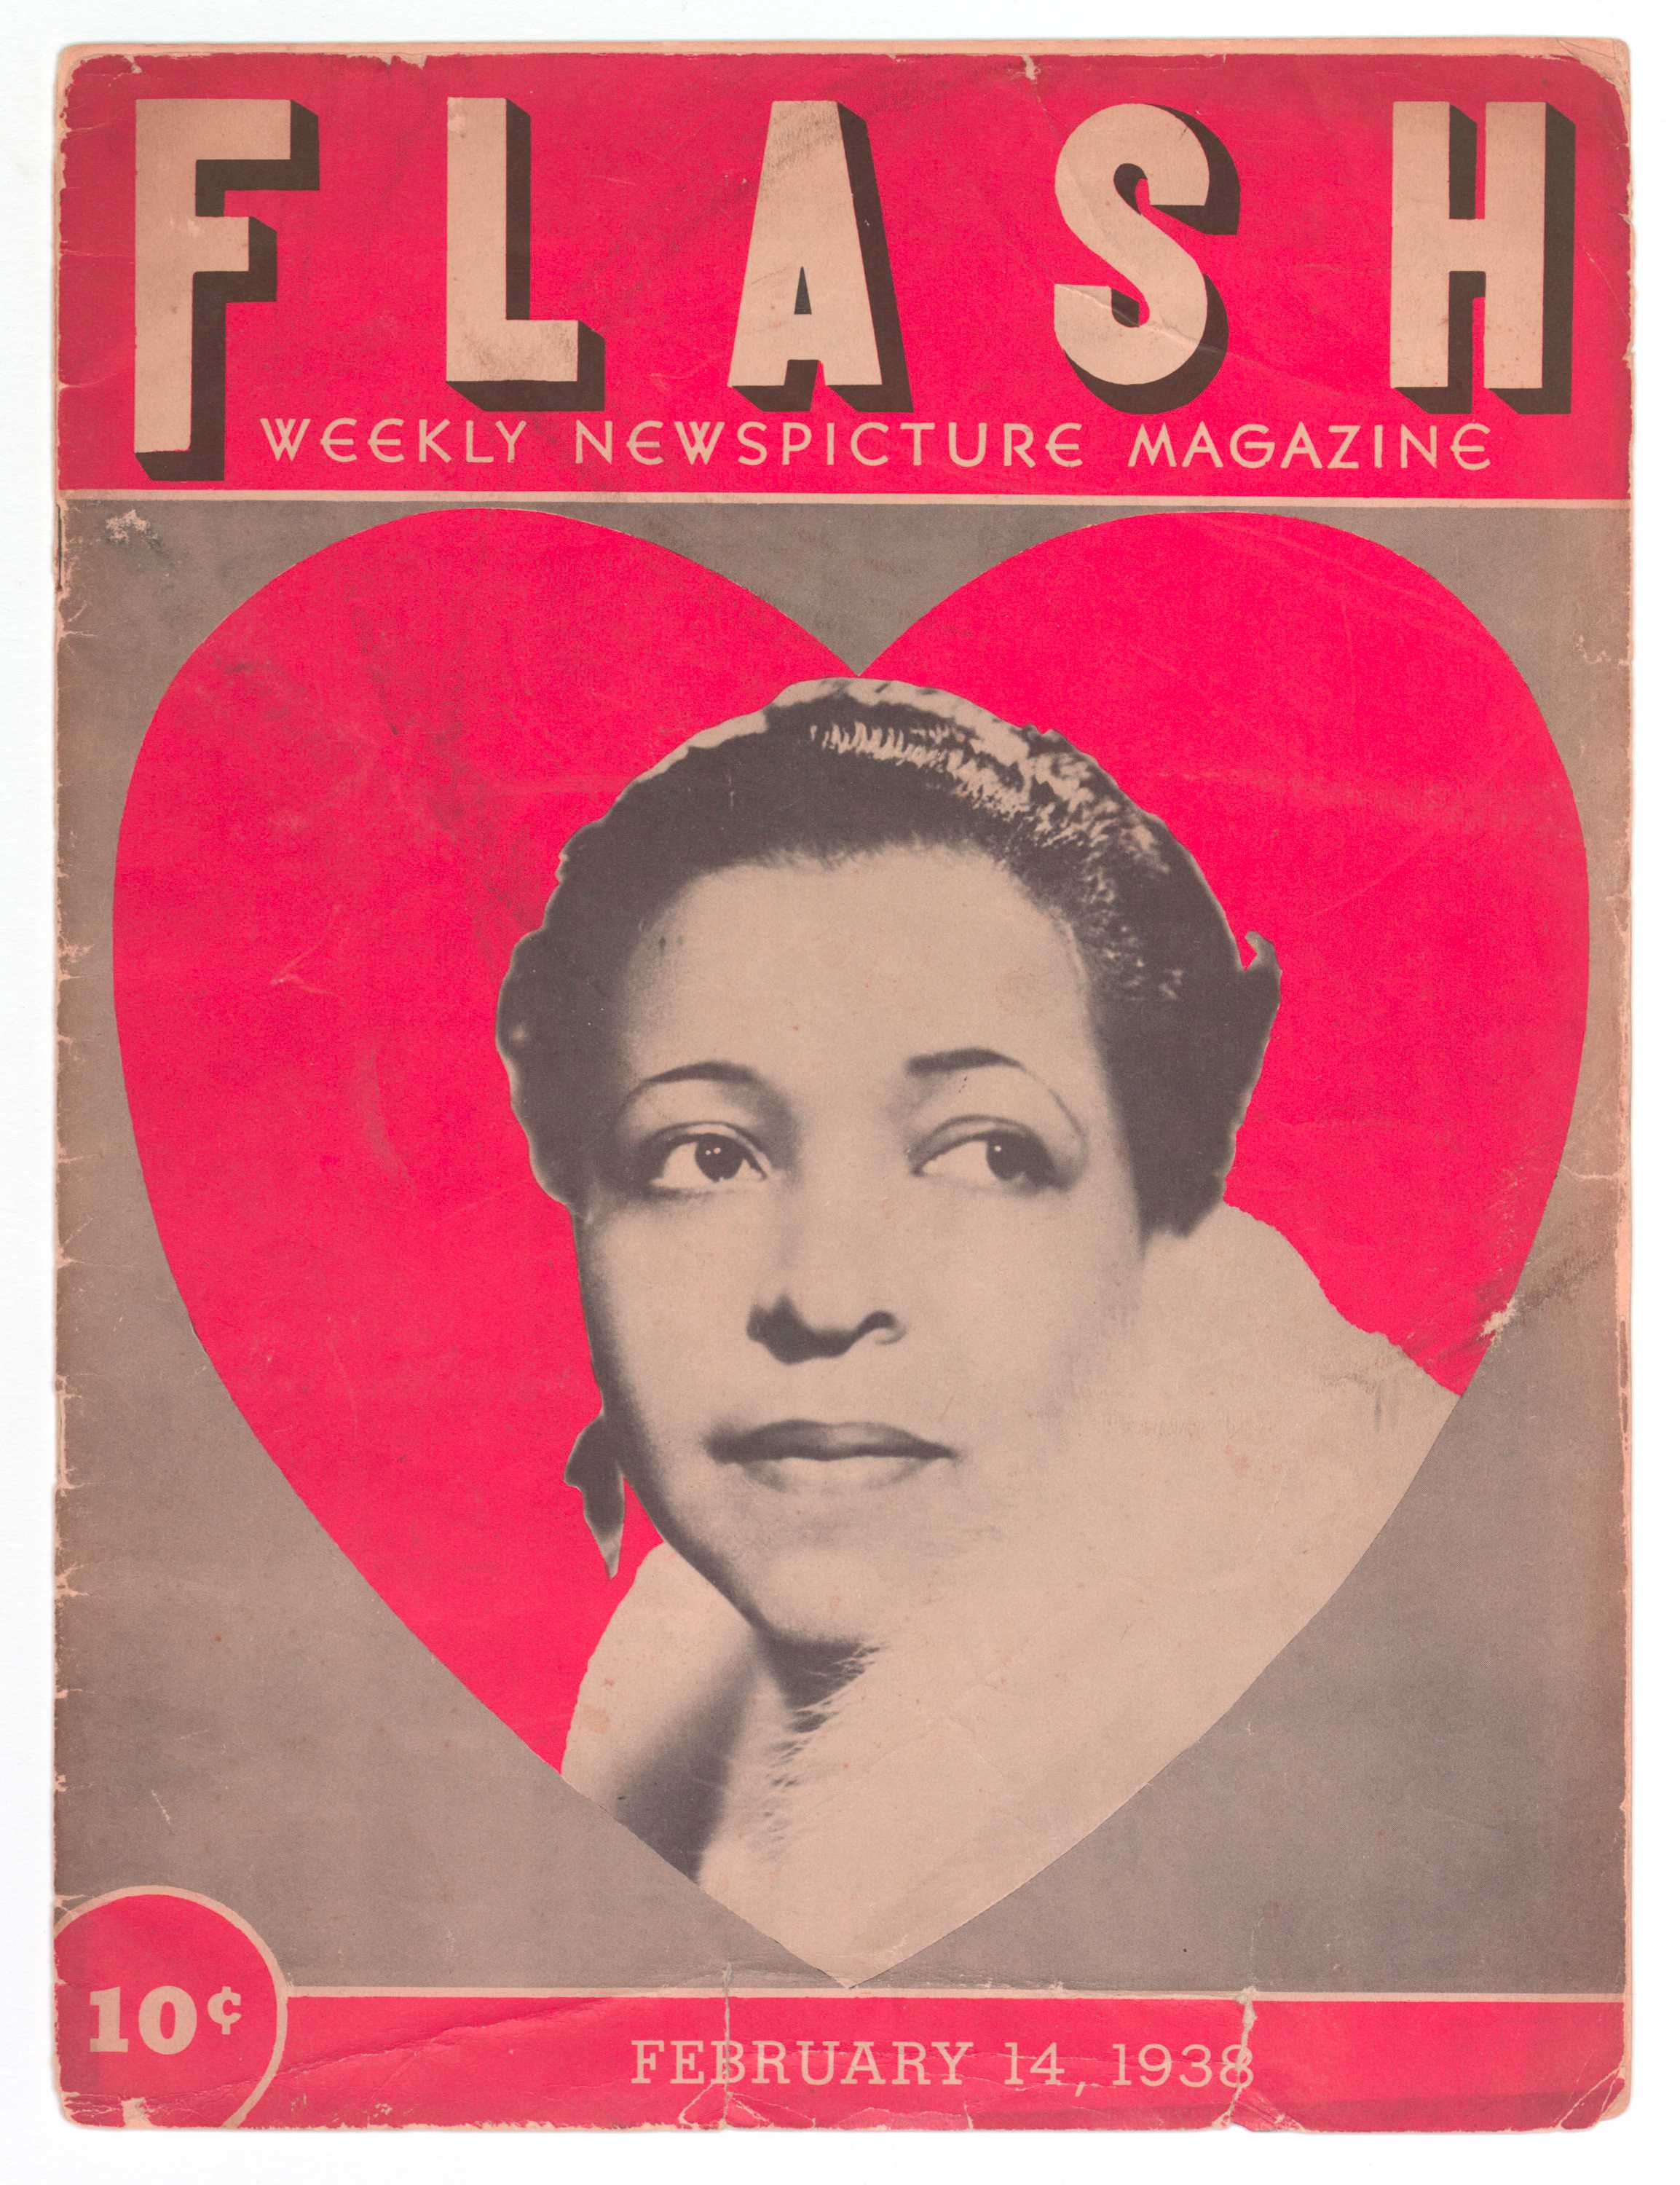 An issue of Flash Weekly Newspicture Magazine from February 14, 1938.